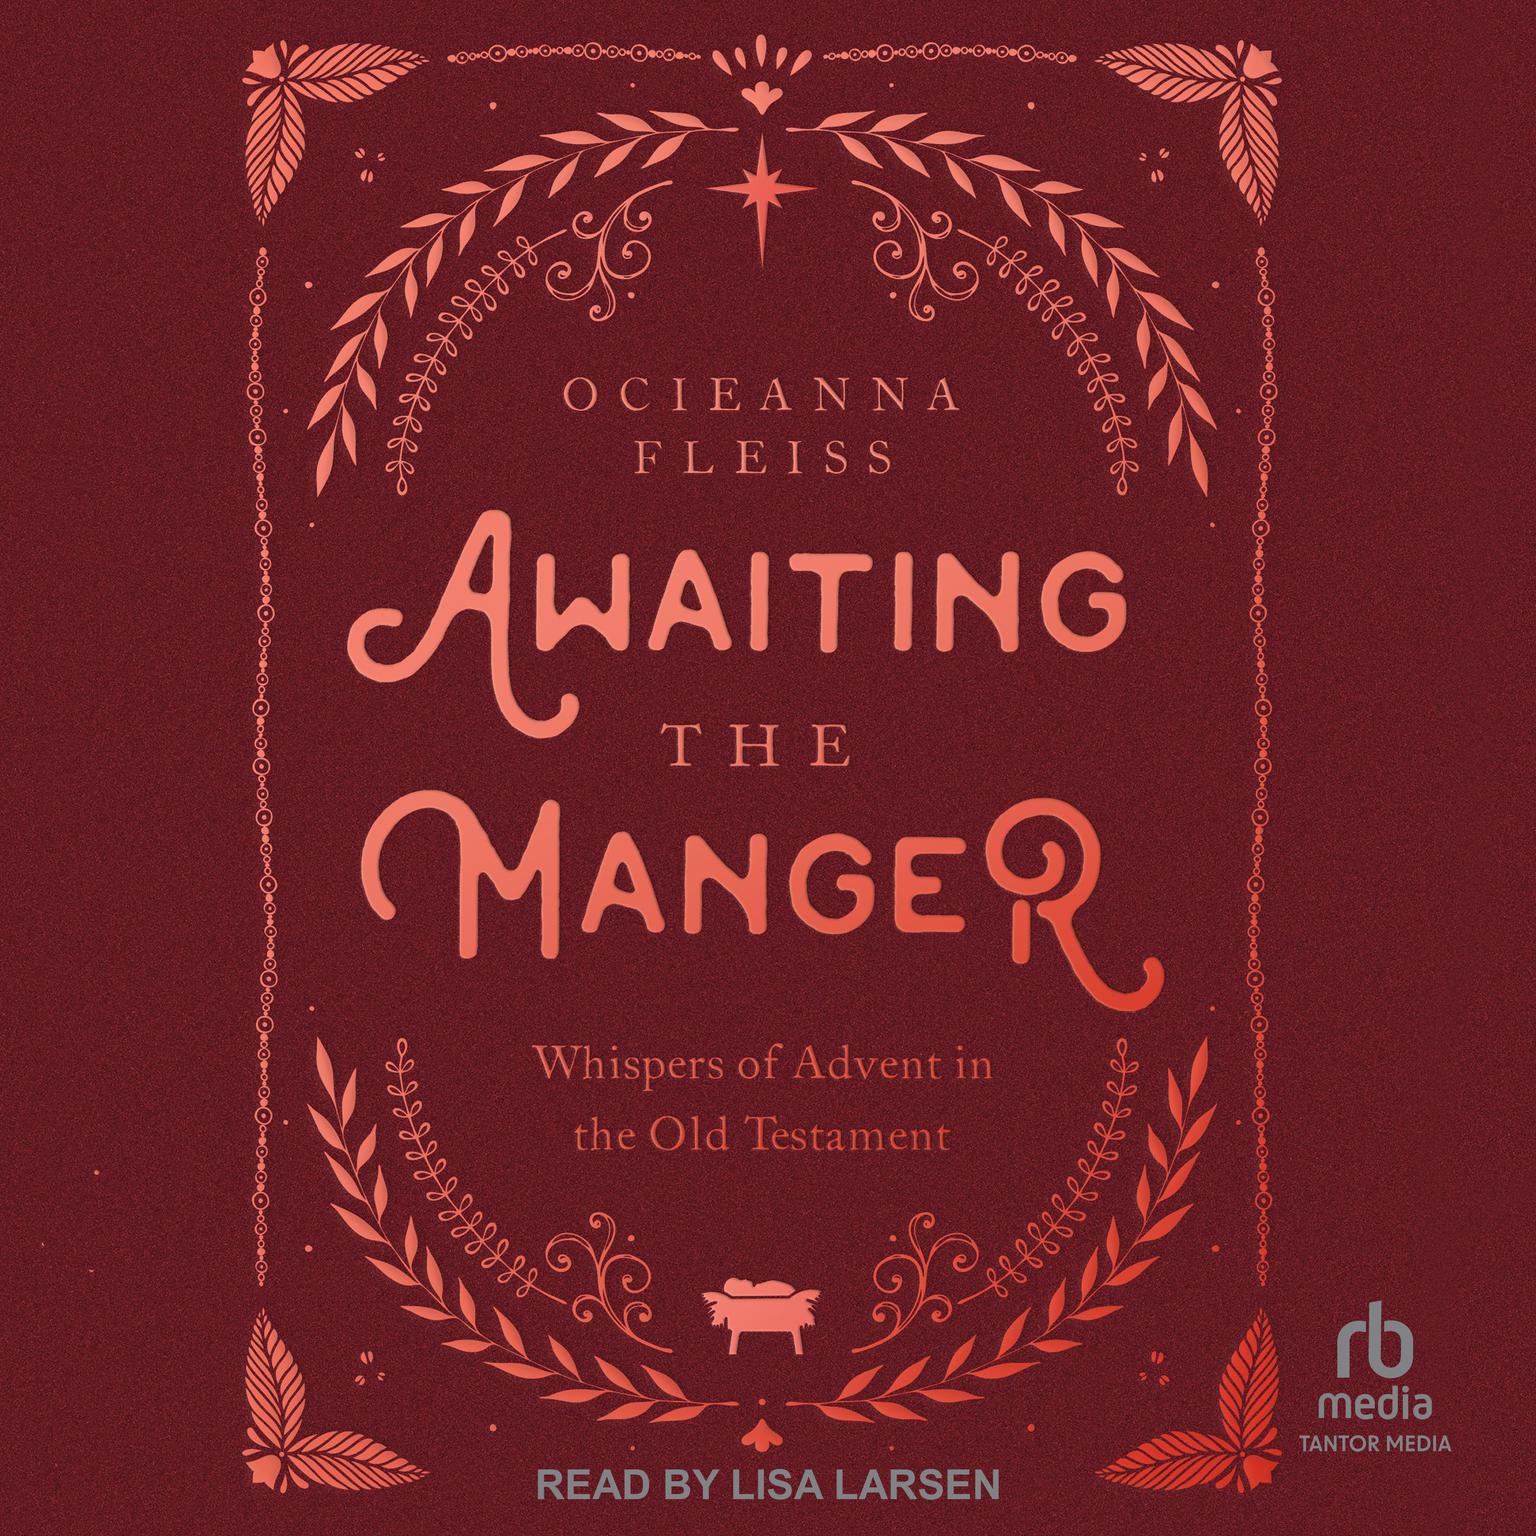 Awaiting the Manger: Whispers of Advent in the Old Testament Audiobook, by Ocieanna Fleiss